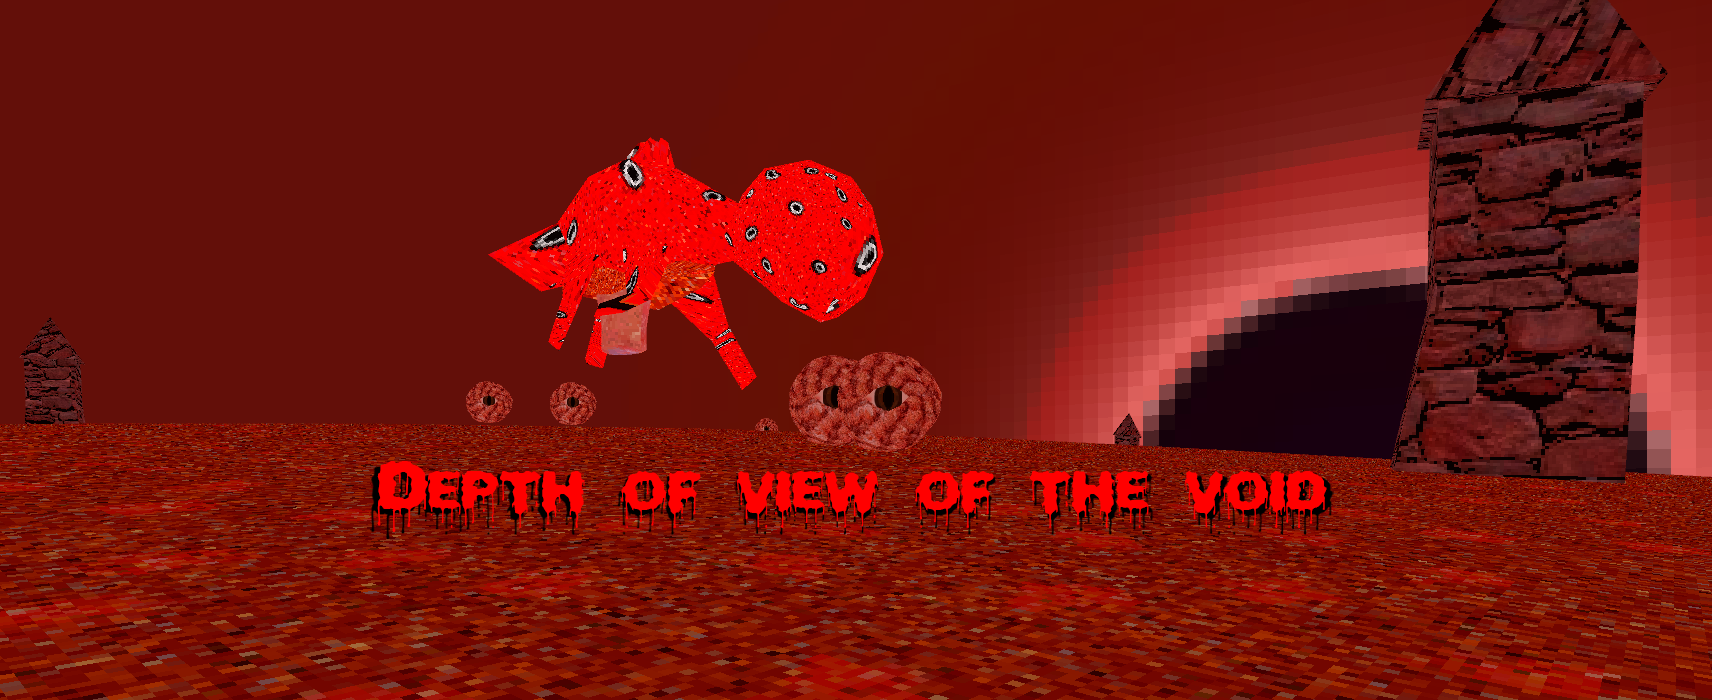 Depth of view of the void